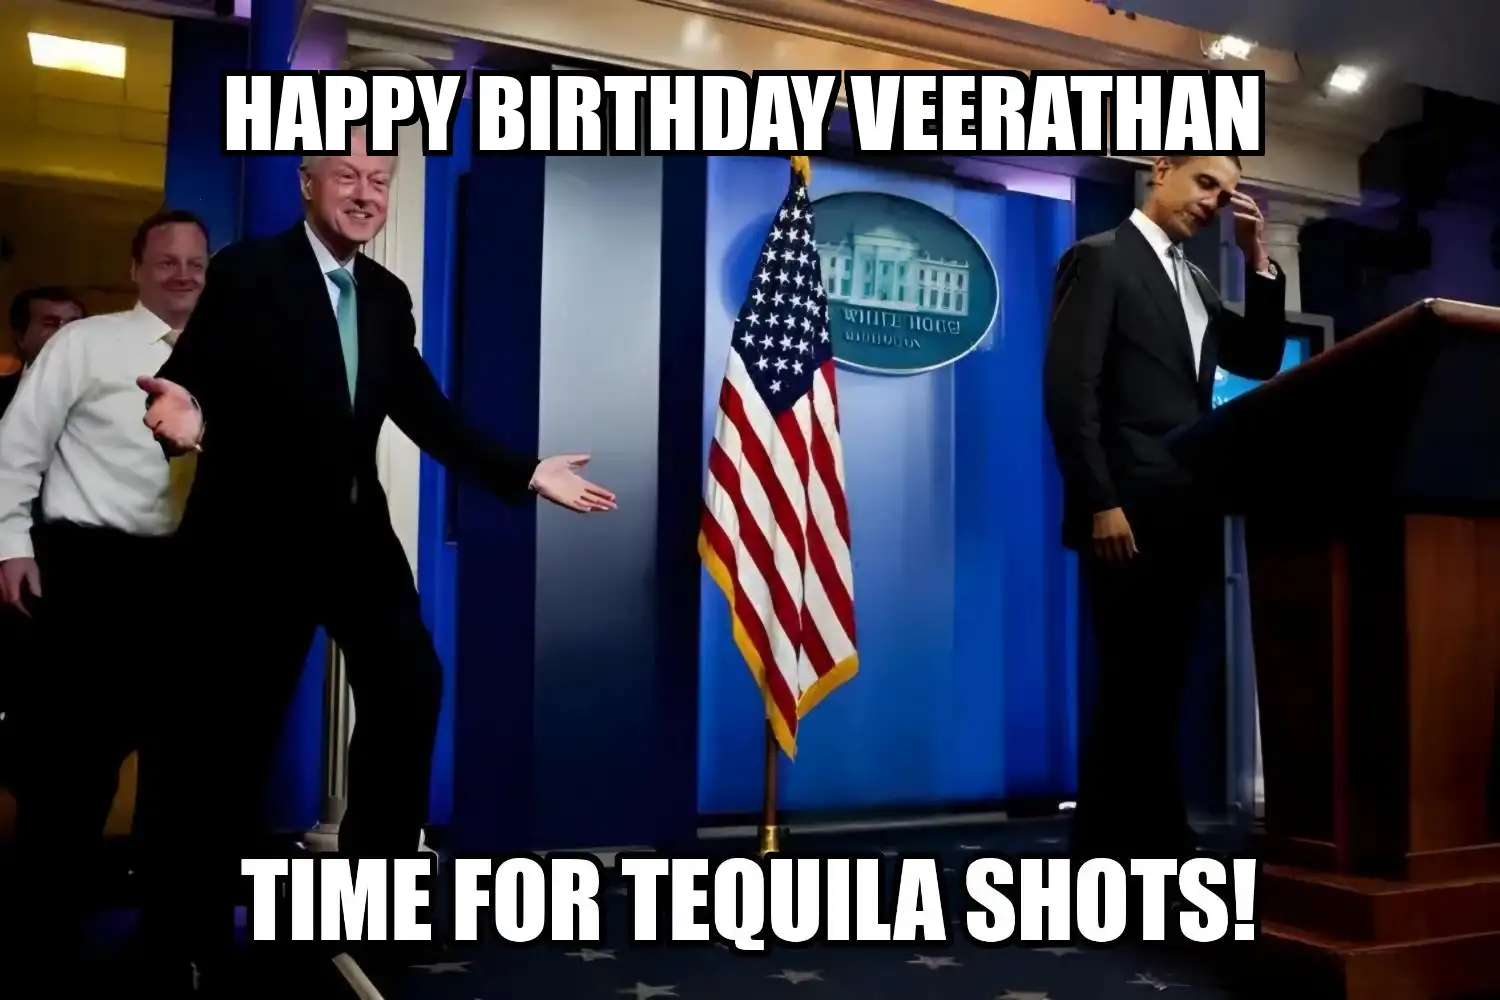 Happy Birthday Veerathan Time For Tequila Shots Memes